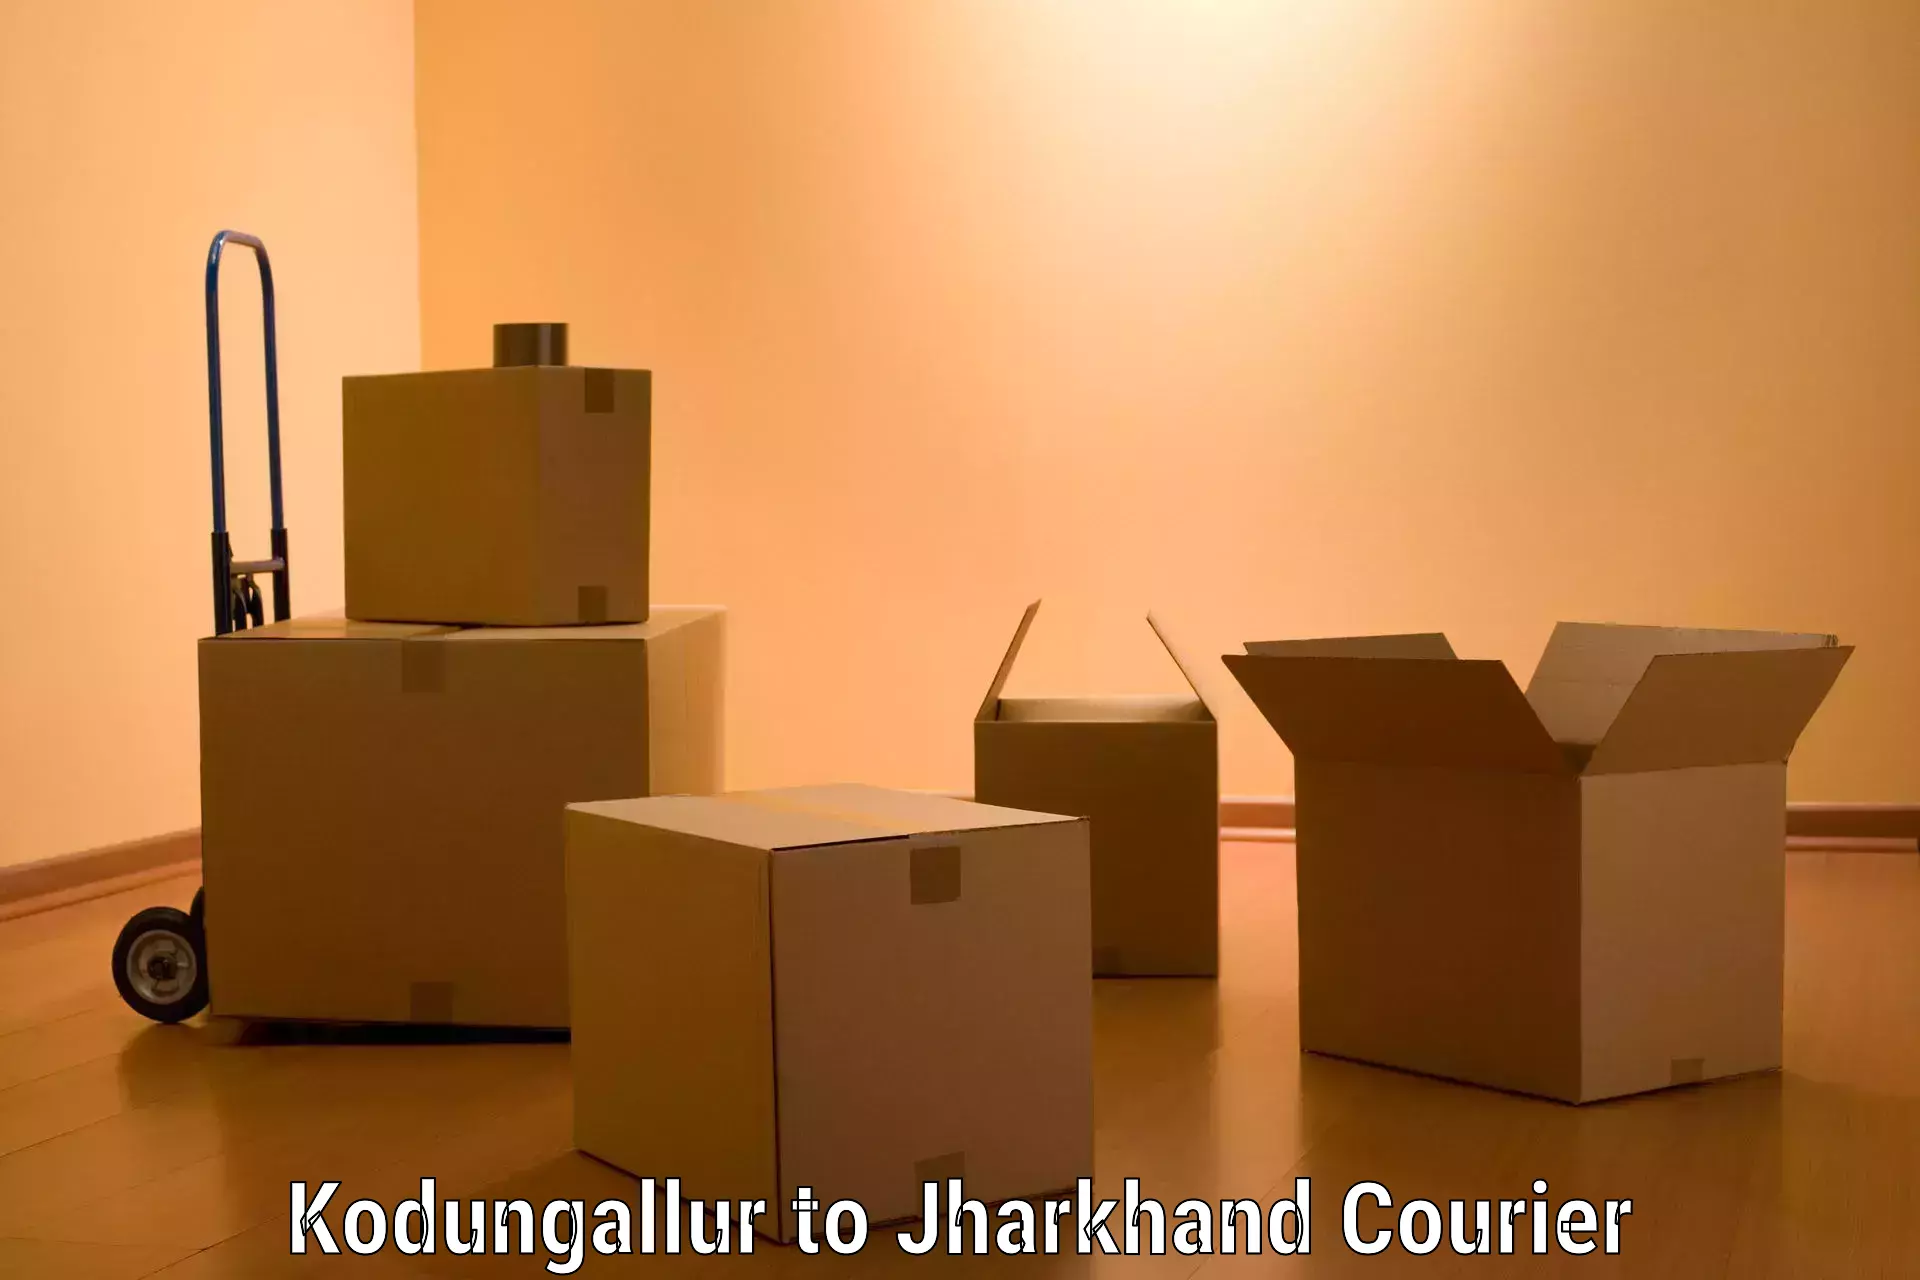 Furniture delivery service Kodungallur to Ranchi